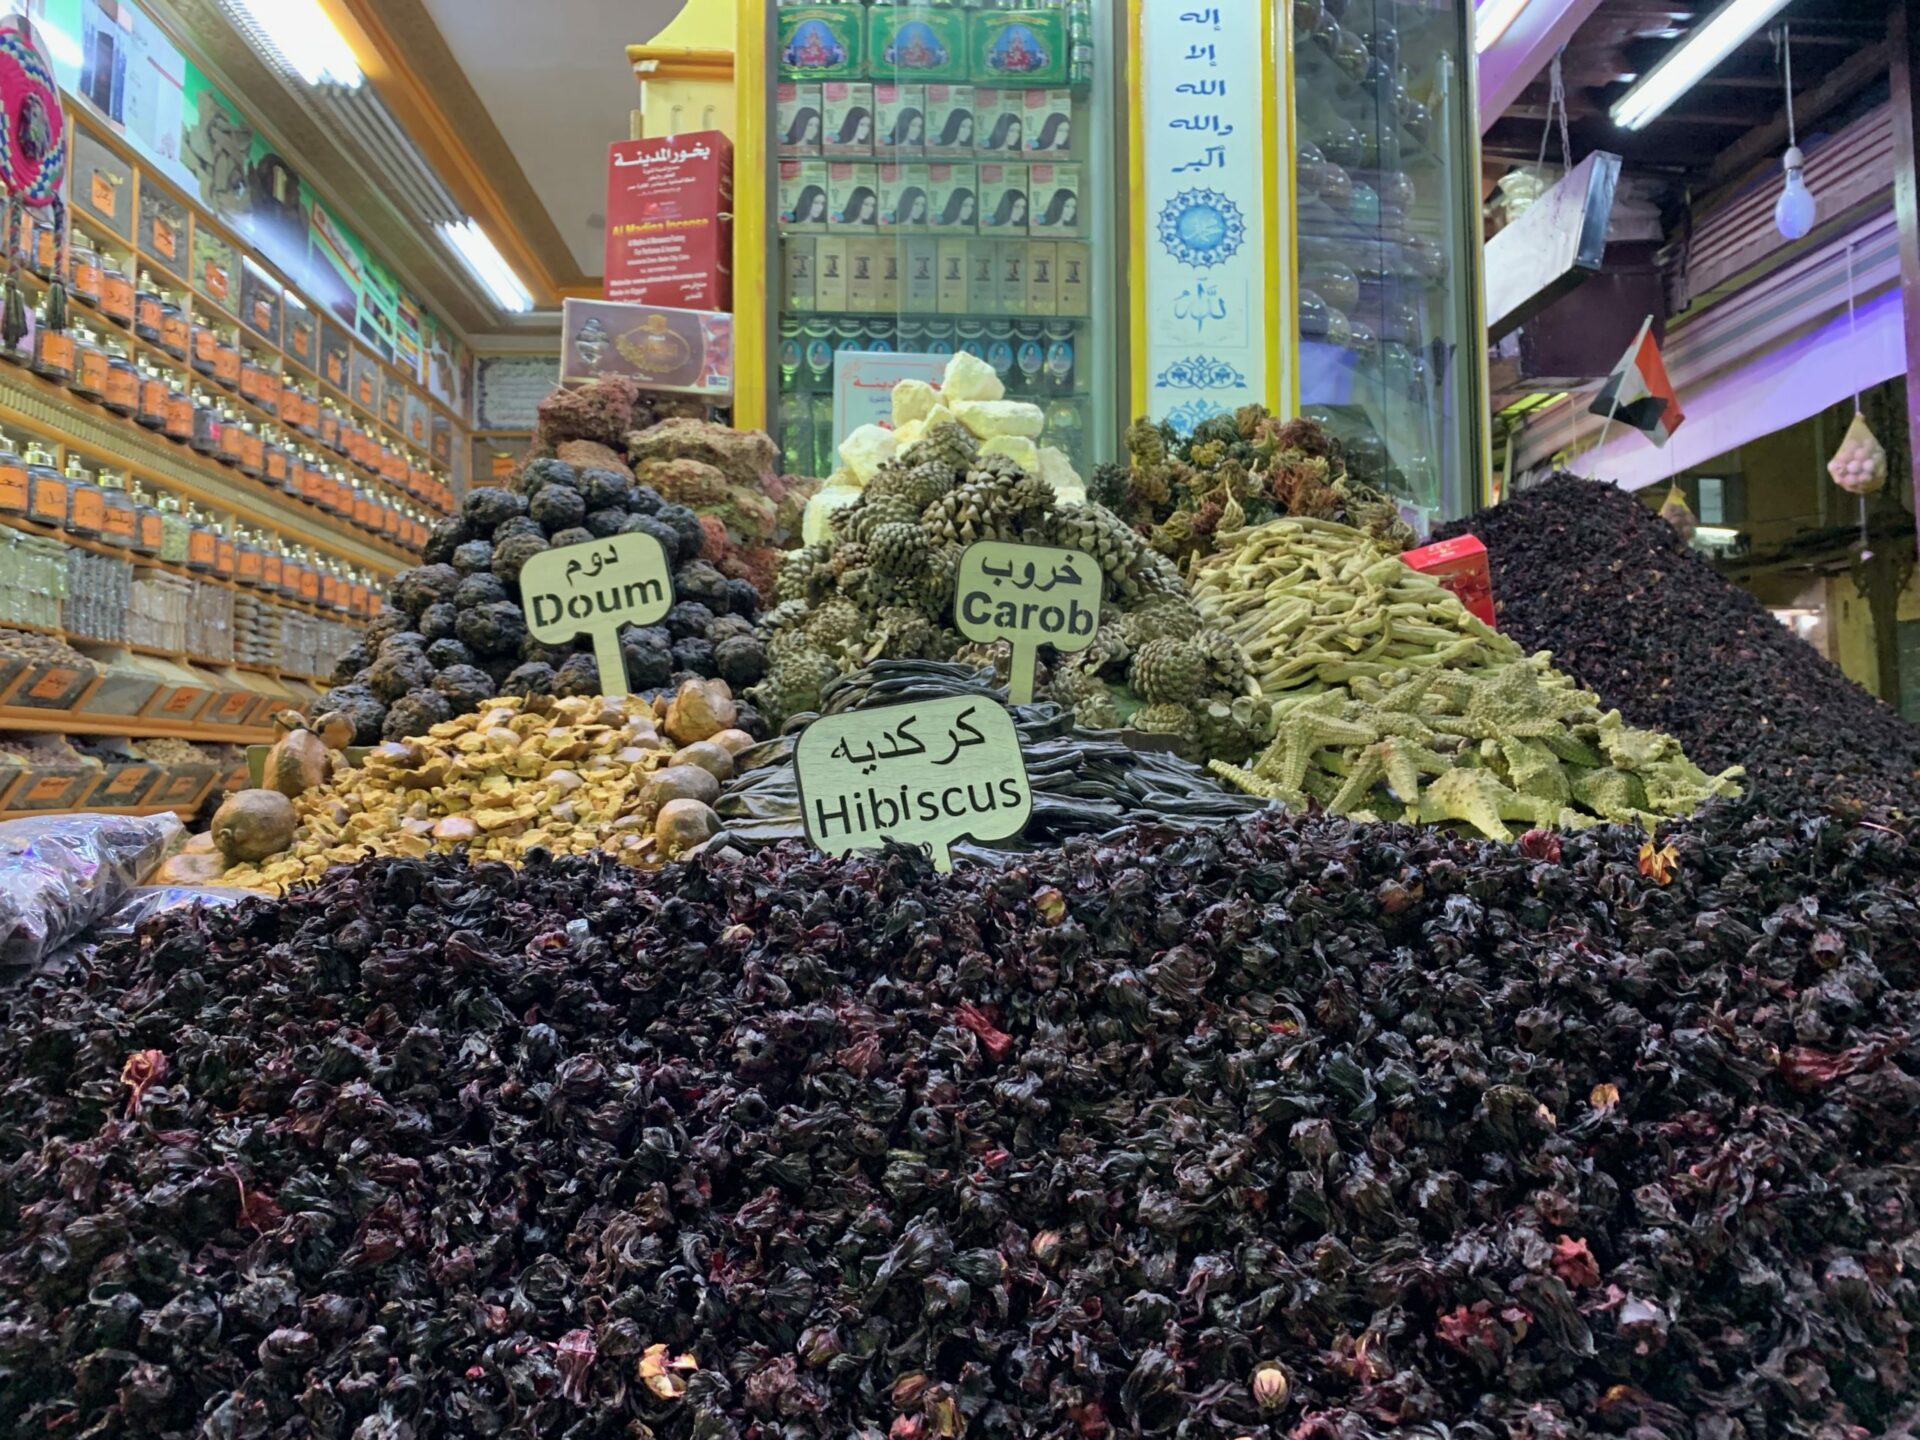 Pile of spices and dates at Aswan marketplace